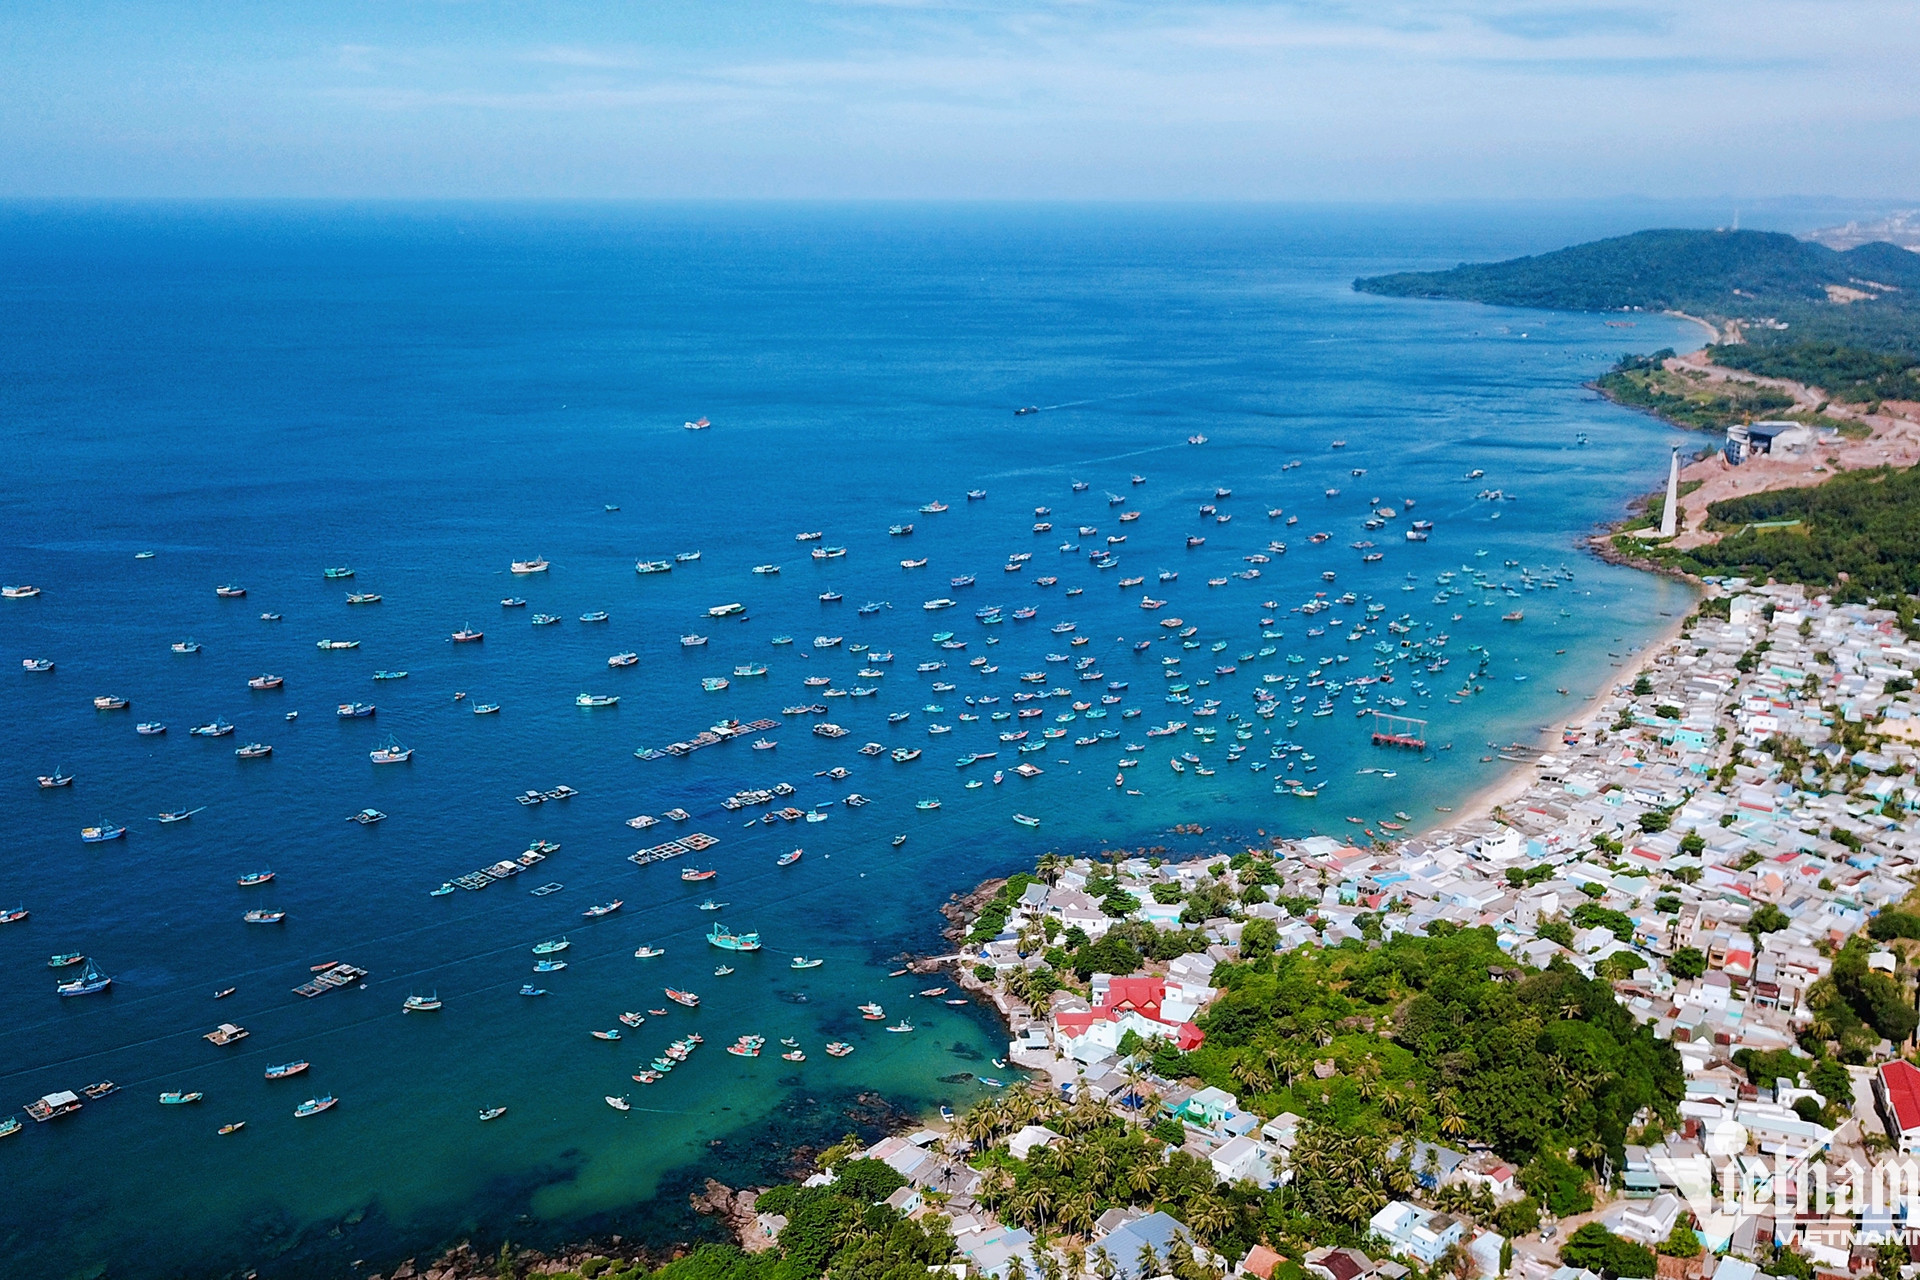 Phu Quoc: one of world’s top destinations, but Vietnamese are not visiting